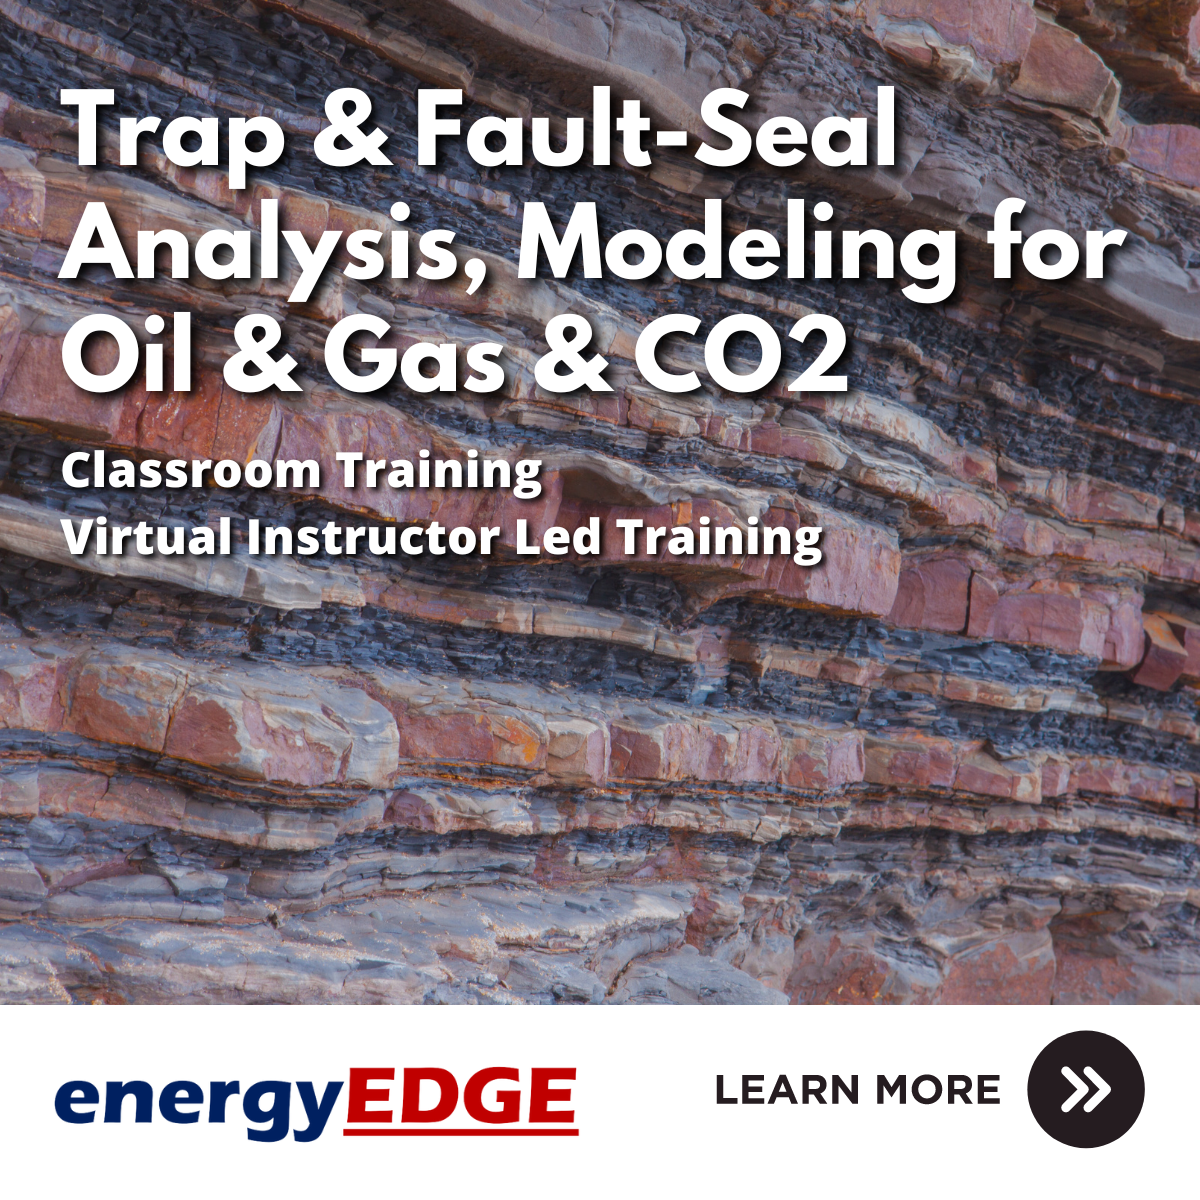 Trap & Fault-Seal Analysis, Modeling for Oil & Gas and CO2